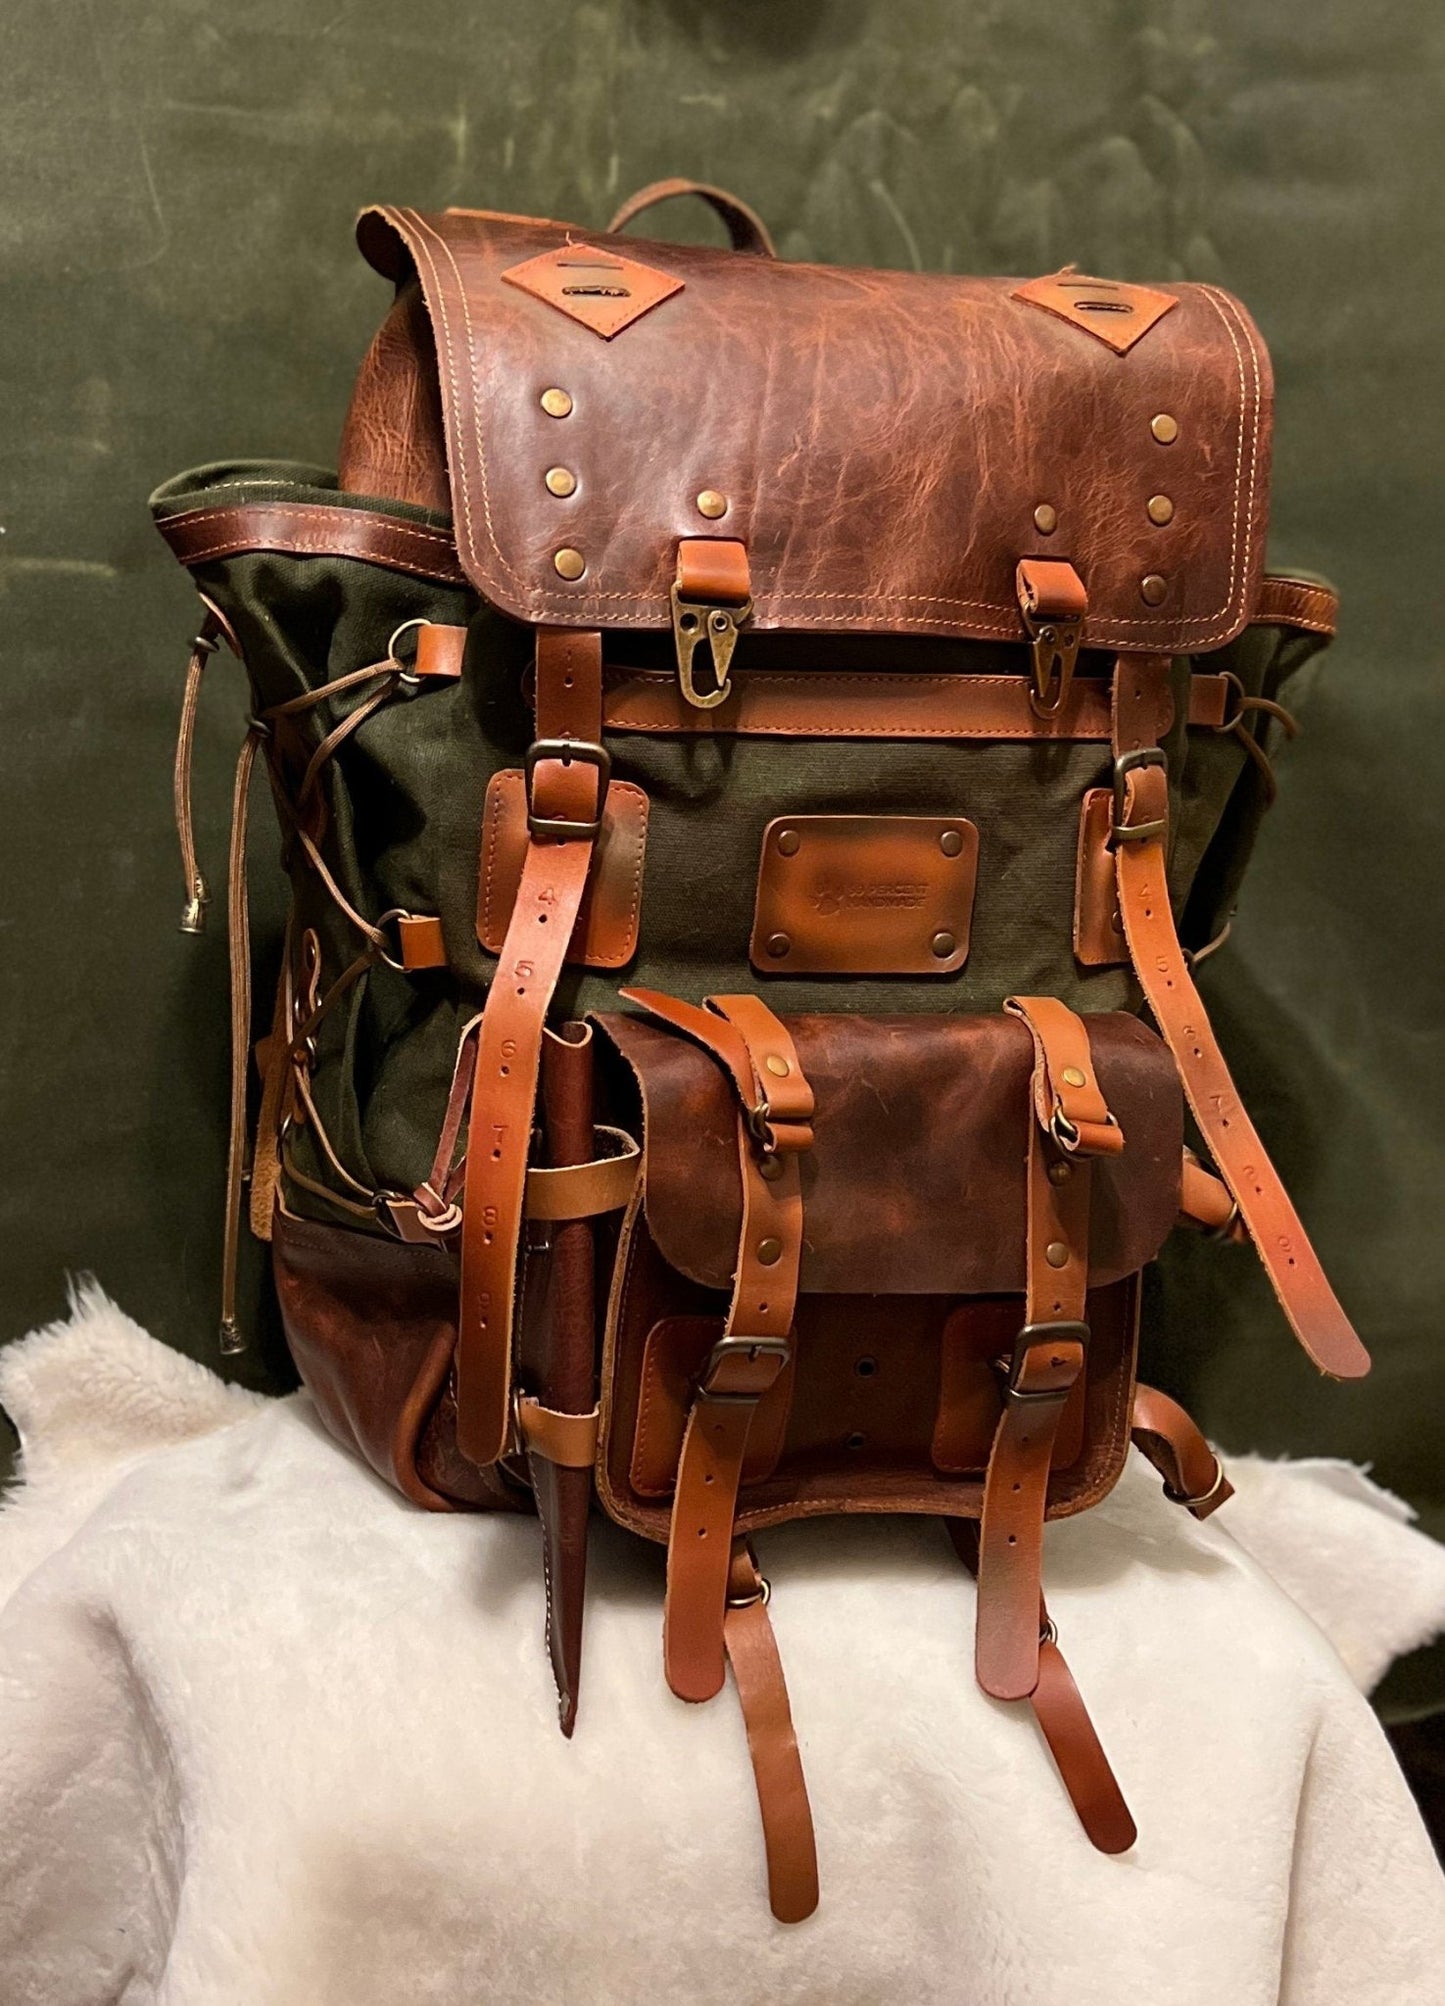 Hiking Backpack | Camping Backpack  | 25L-35L-45L | Brown-Green | Canvas and Leather backpack 99percenthandmade   